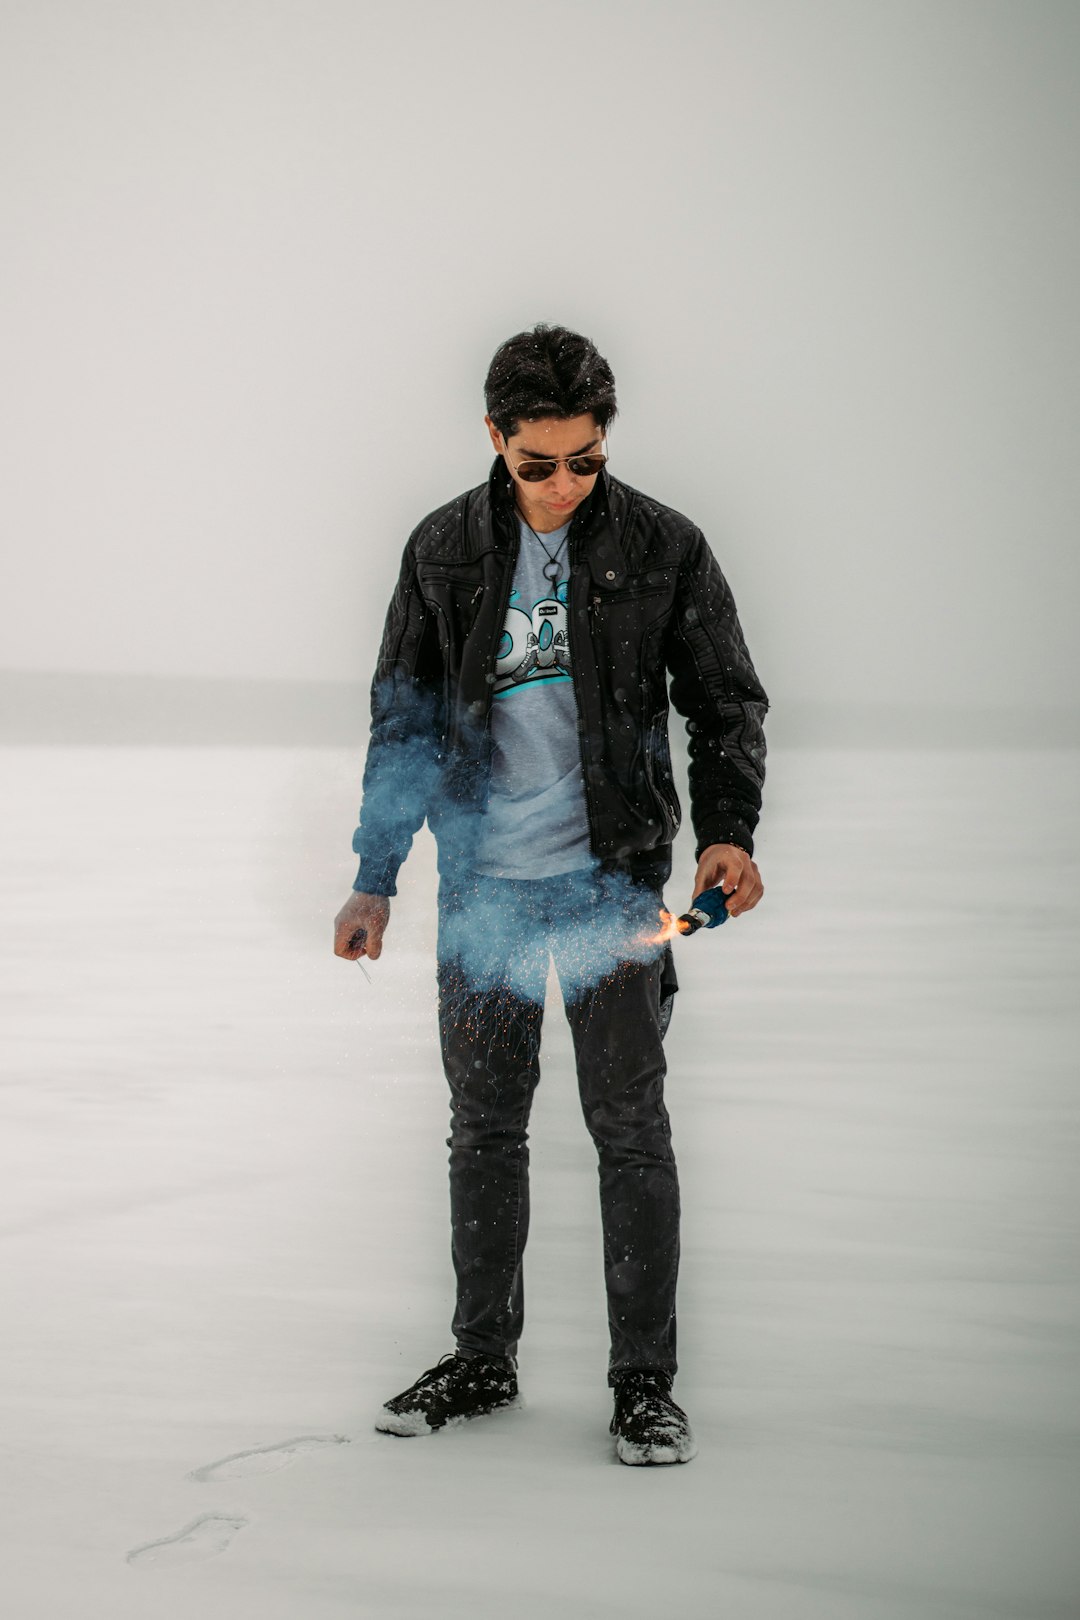 man in black leather jacket and blue denim jeans standing on snow covered ground